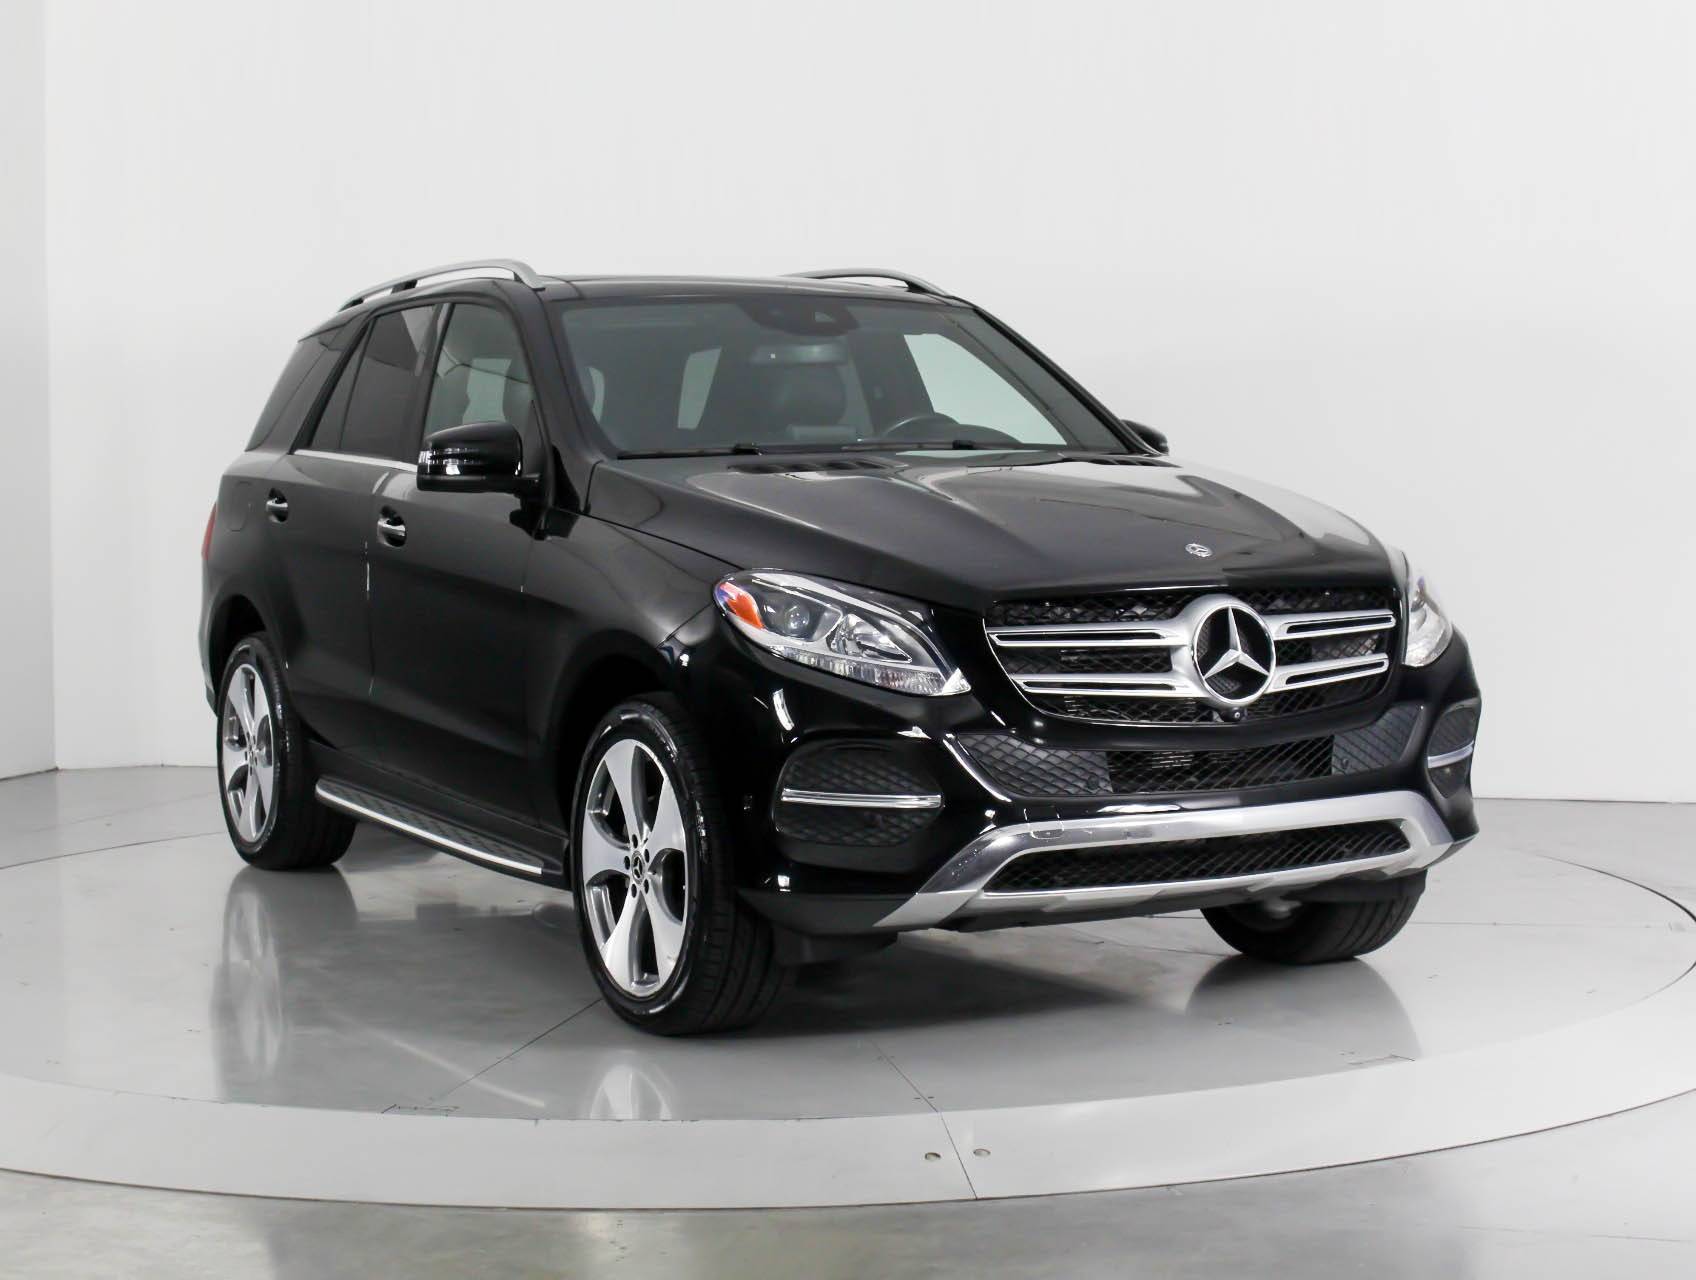 Florida Fine Cars - Used MERCEDES-BENZ GLE CLASS 2017 WEST PALM GLE350